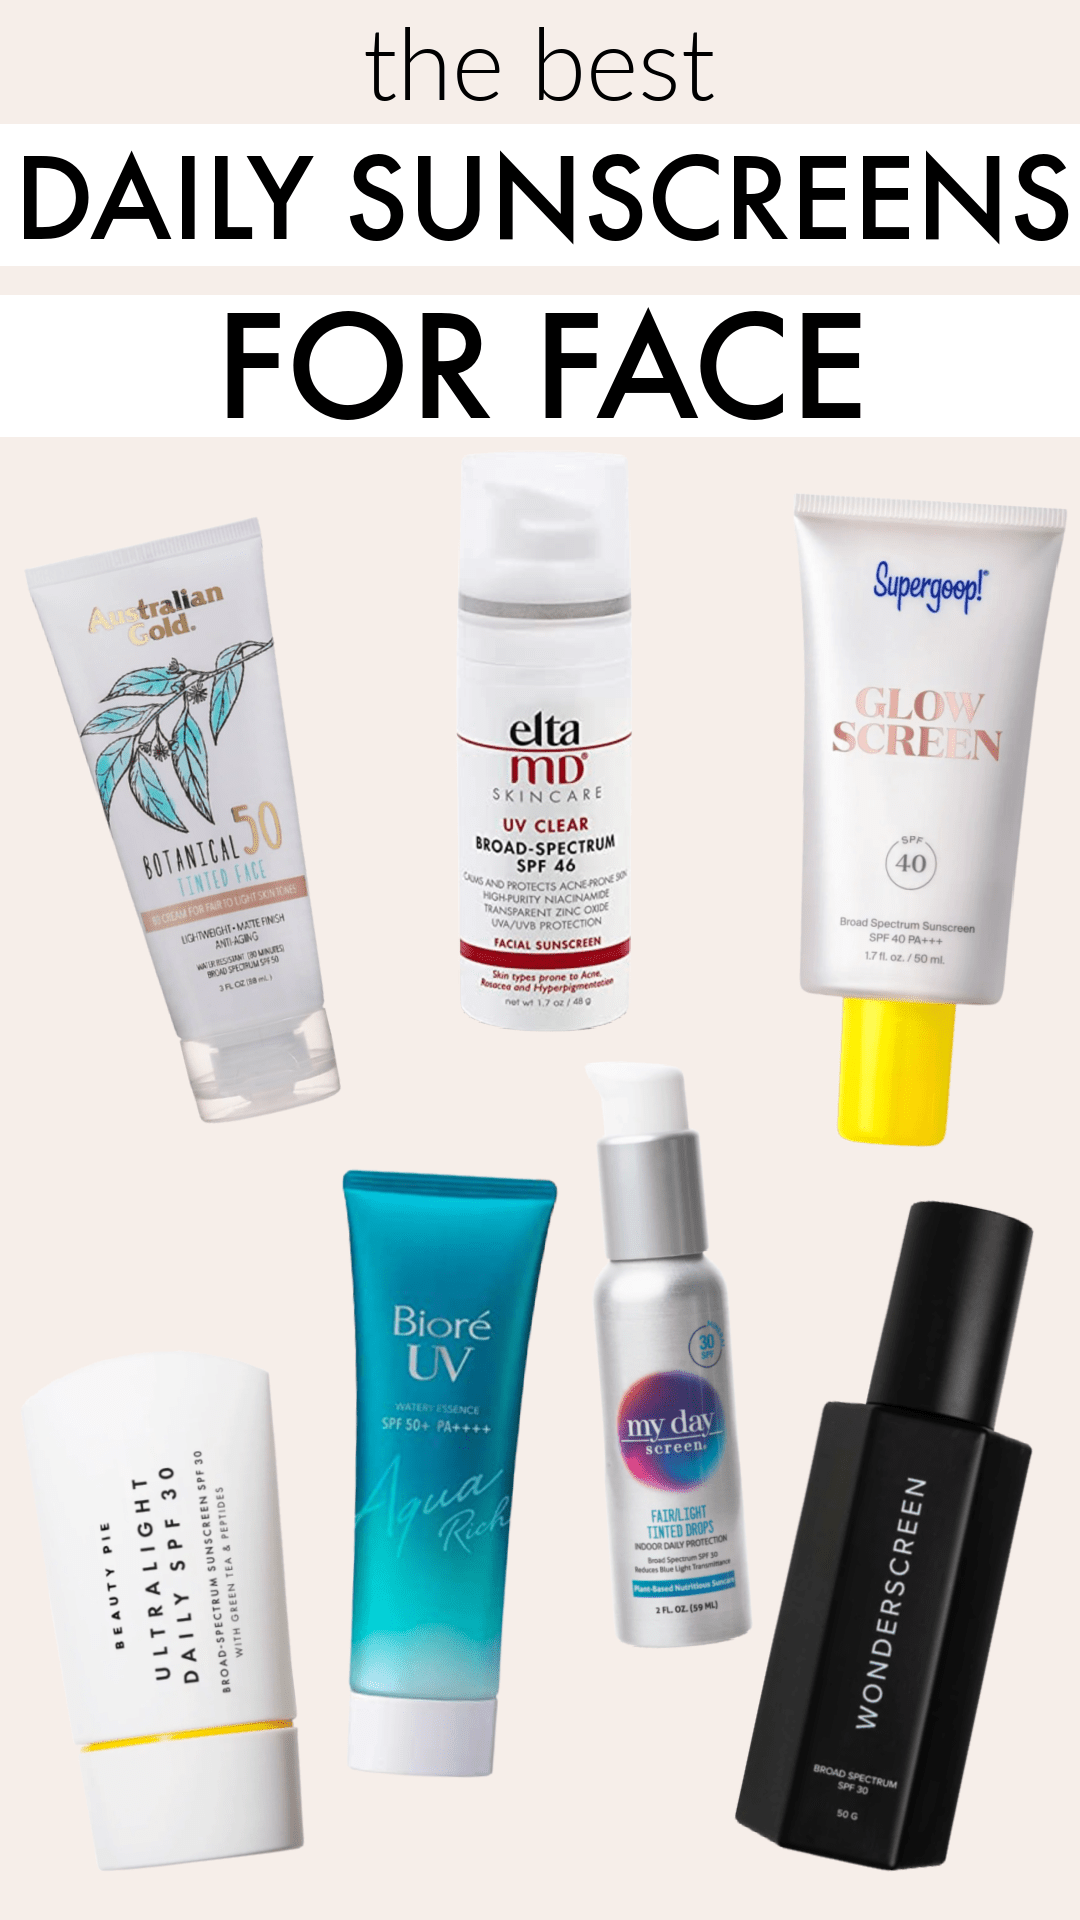 The best daily sunscreens for face - mineral sunscreens, chemical sunscreens, and mineral/chemical blend sunscreens!